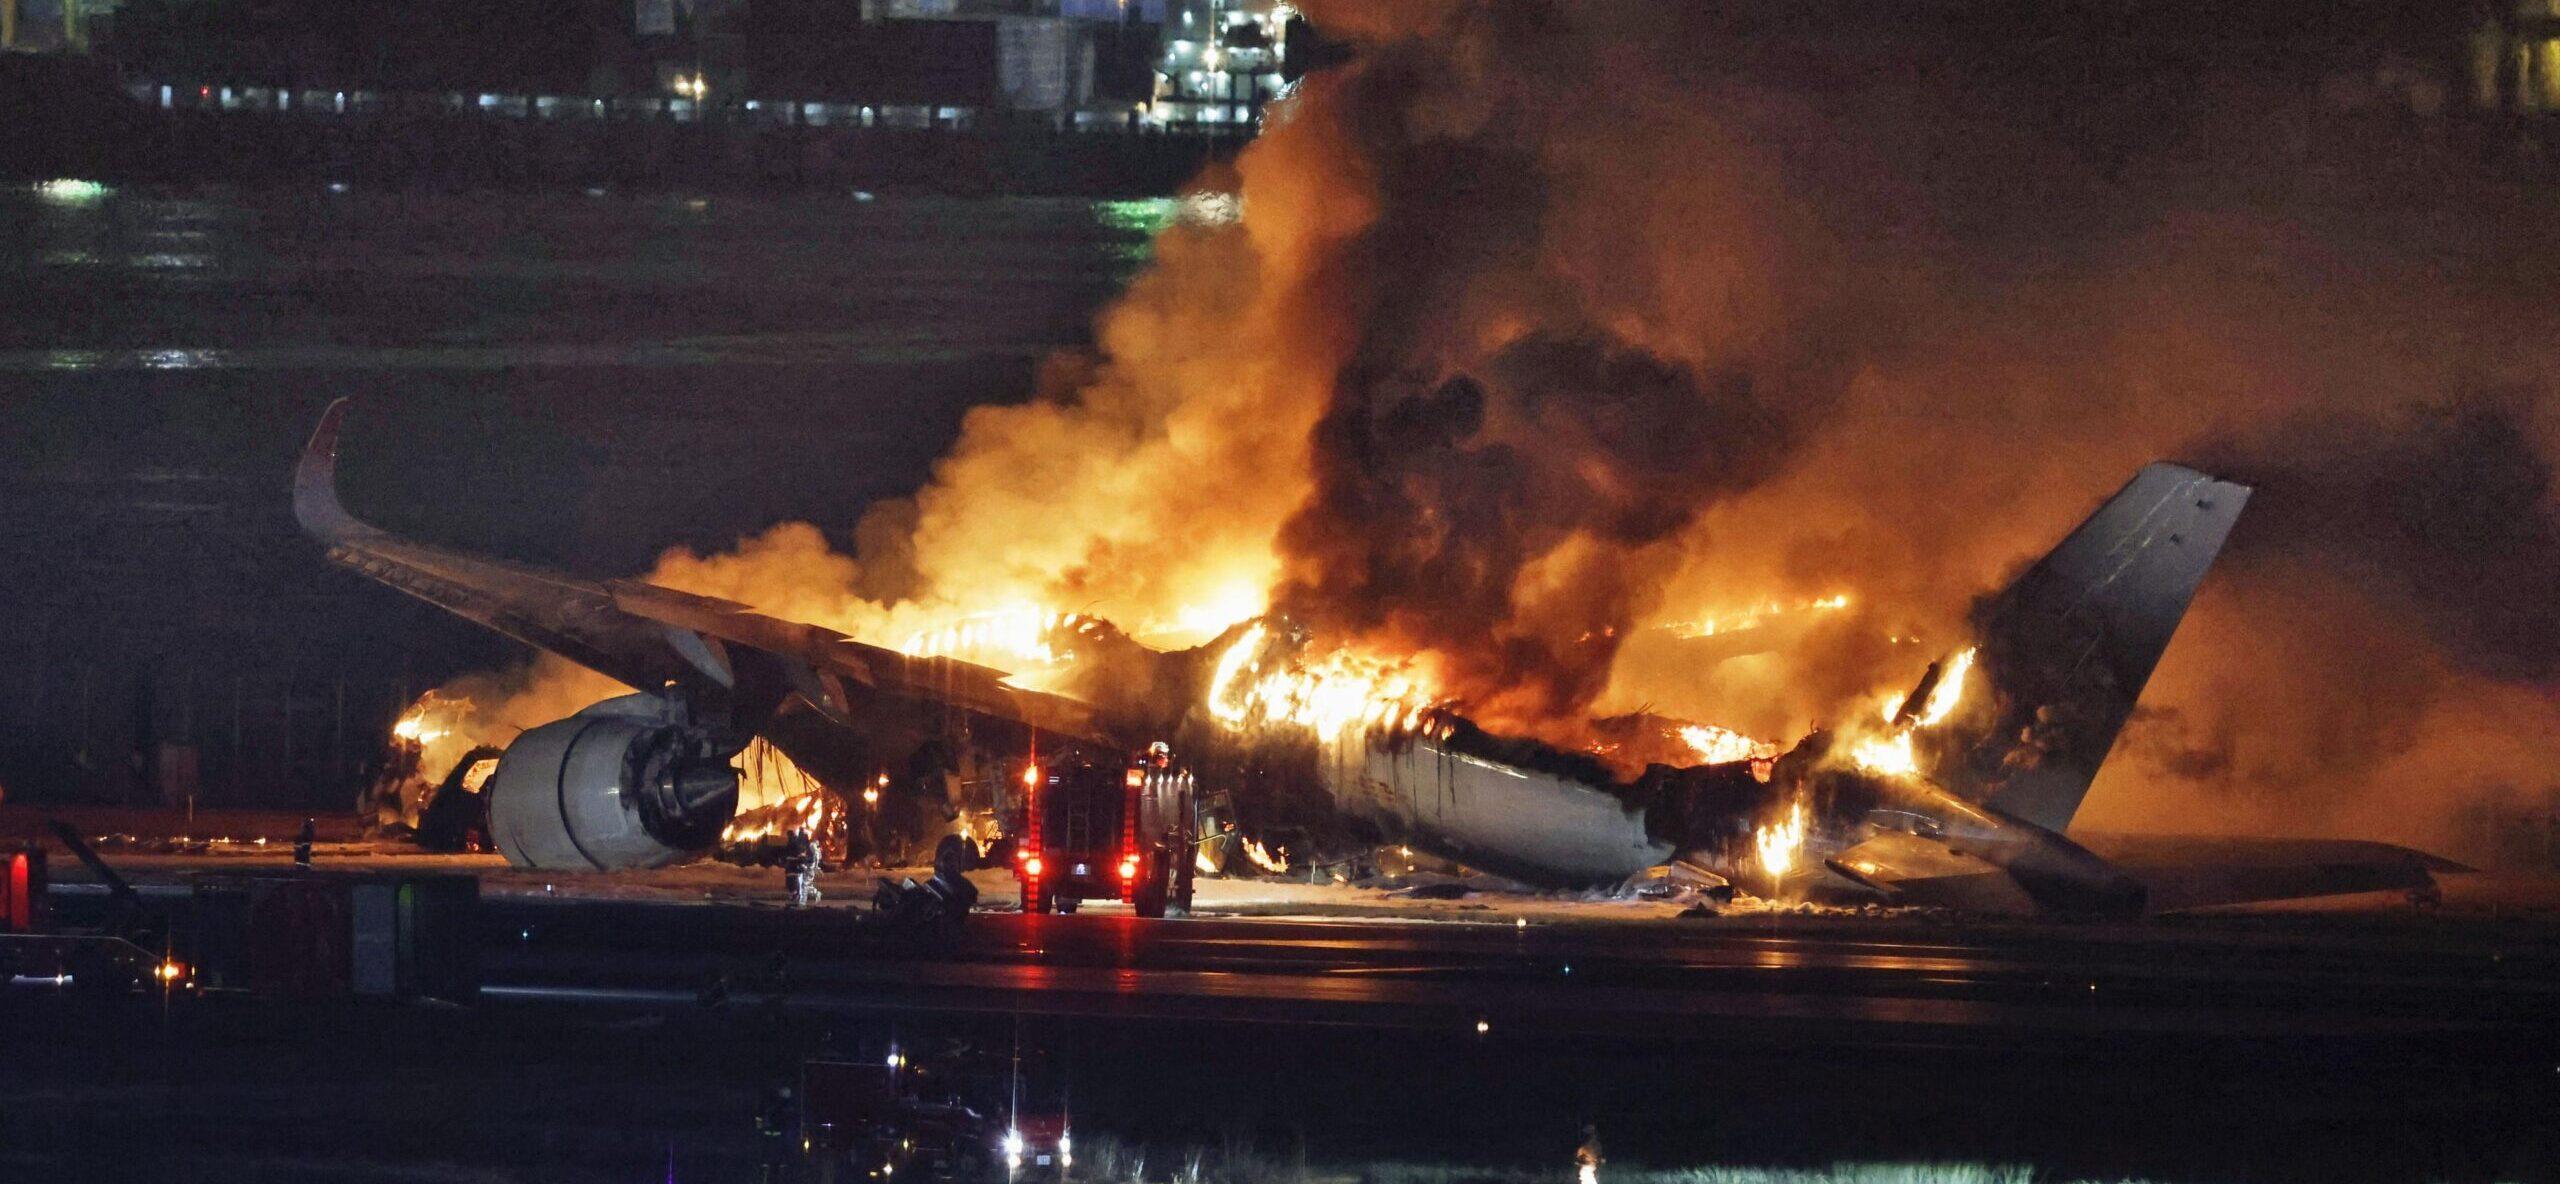 Passengers From Japan Airlines Share Footage Of Horrific Crash